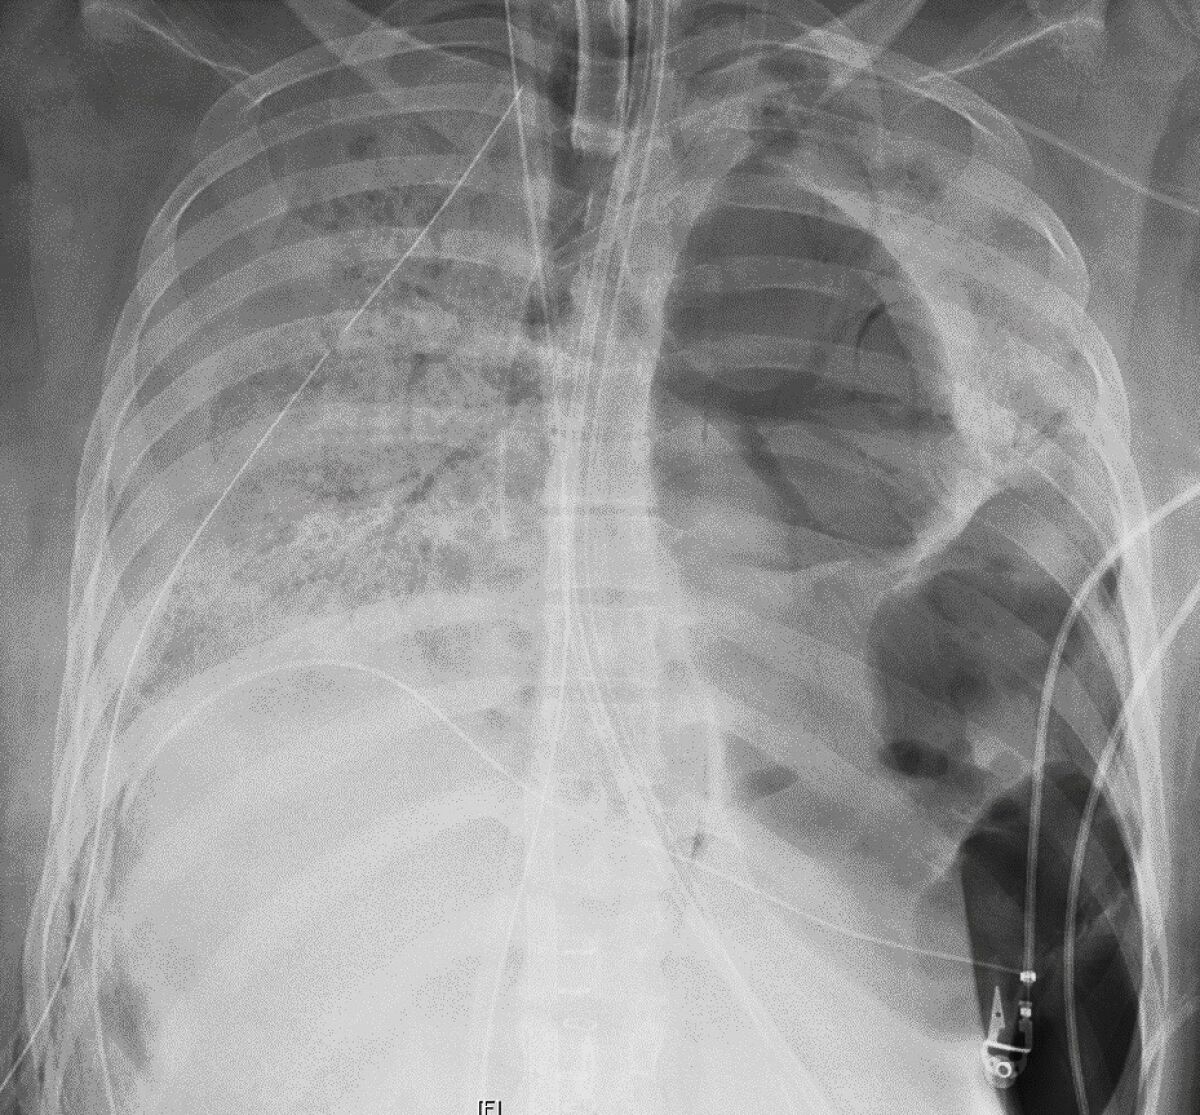 This X-ray image provided by Northwestern Medicine in June 2020 shows the chest of a COVID-19 patient.